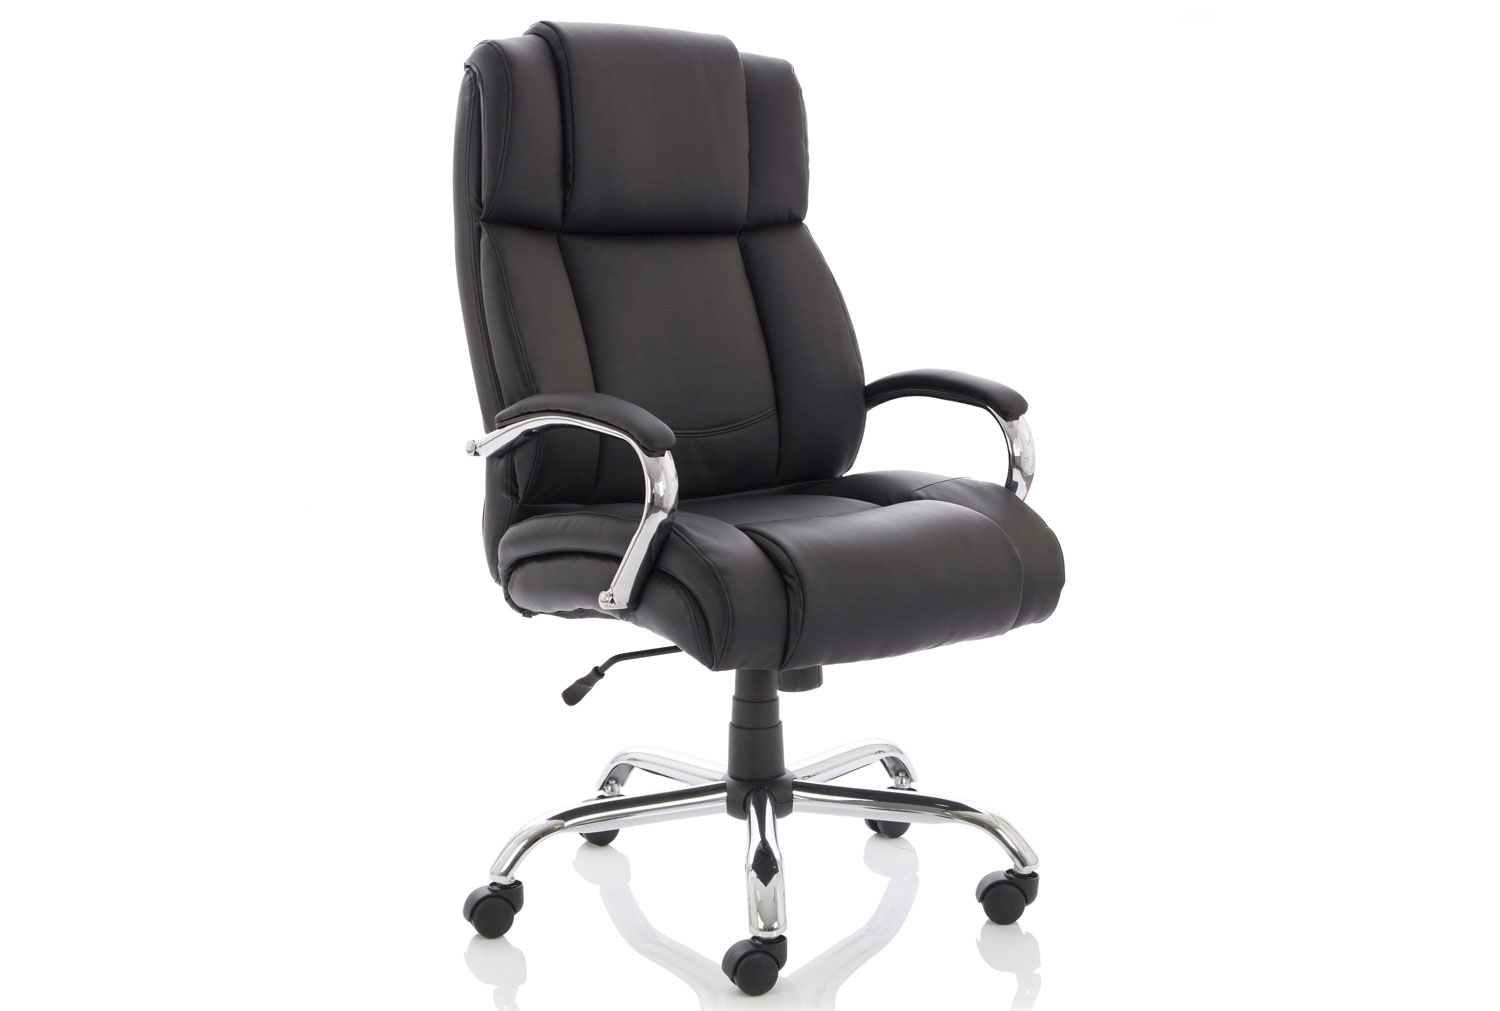 Levira Heavy Duty Bonded Leather Executive Office Chair